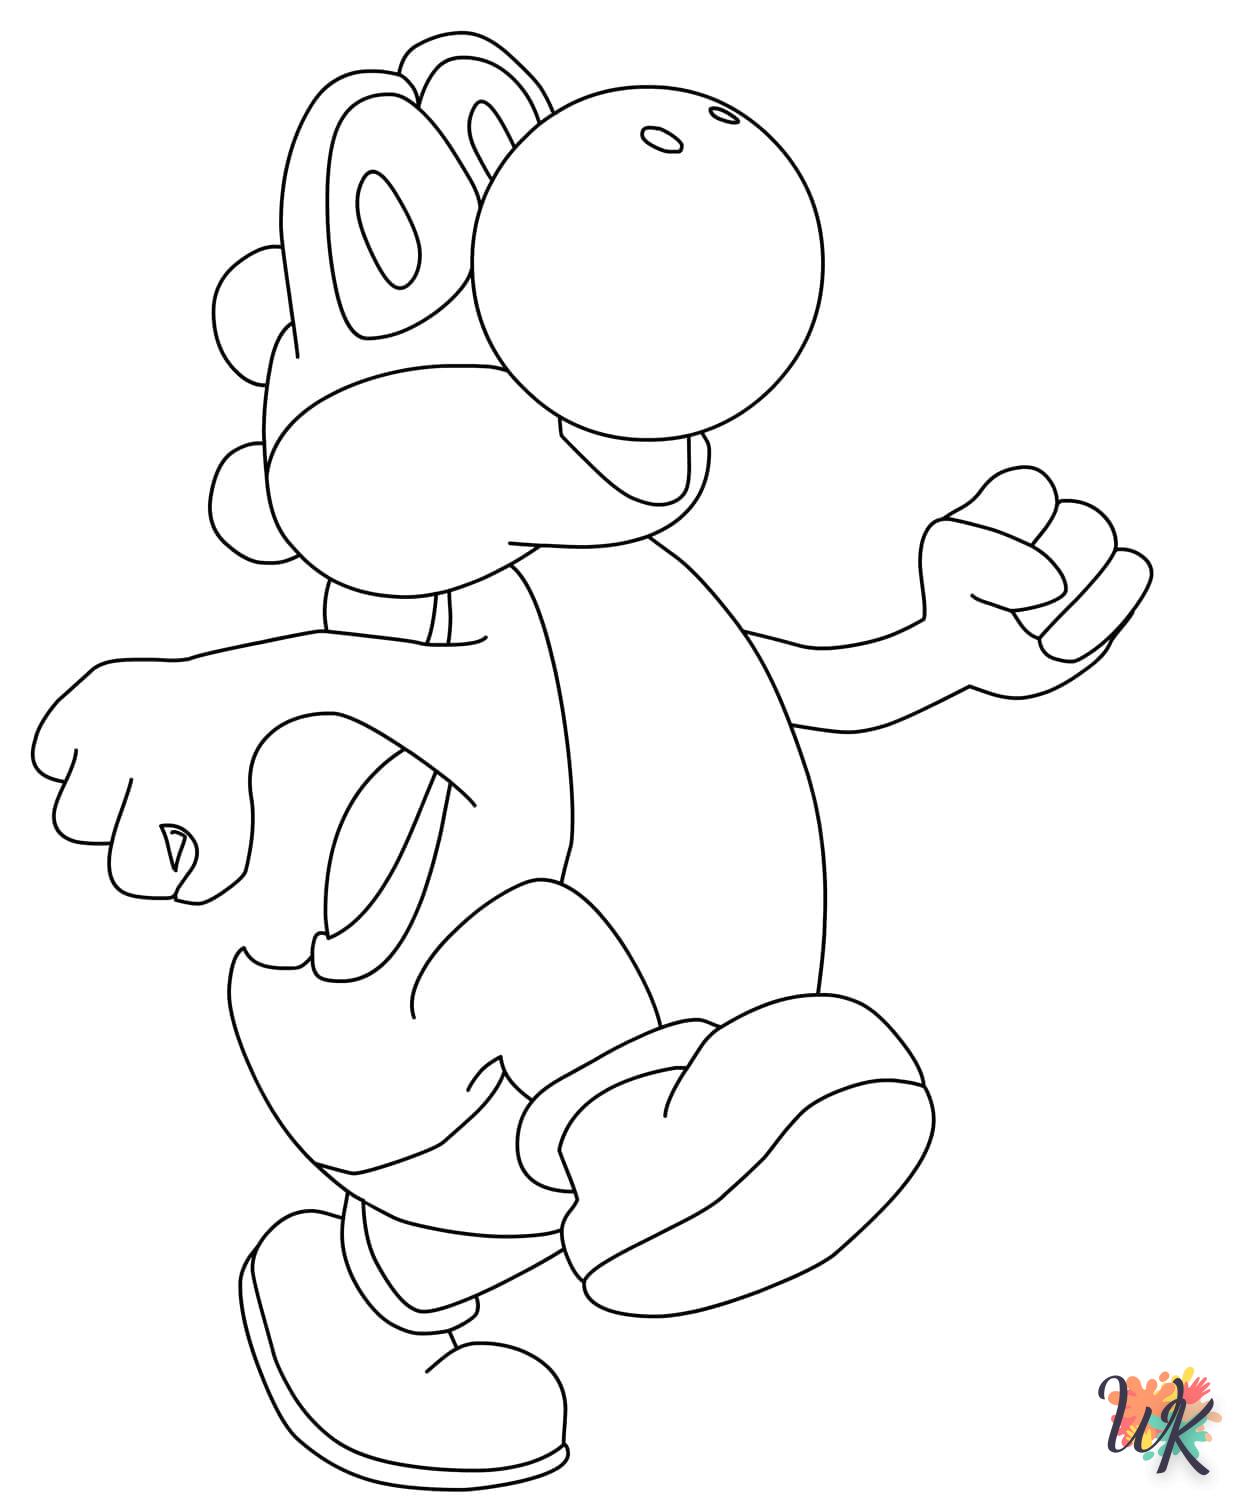 Yoshi coloring page to print for free